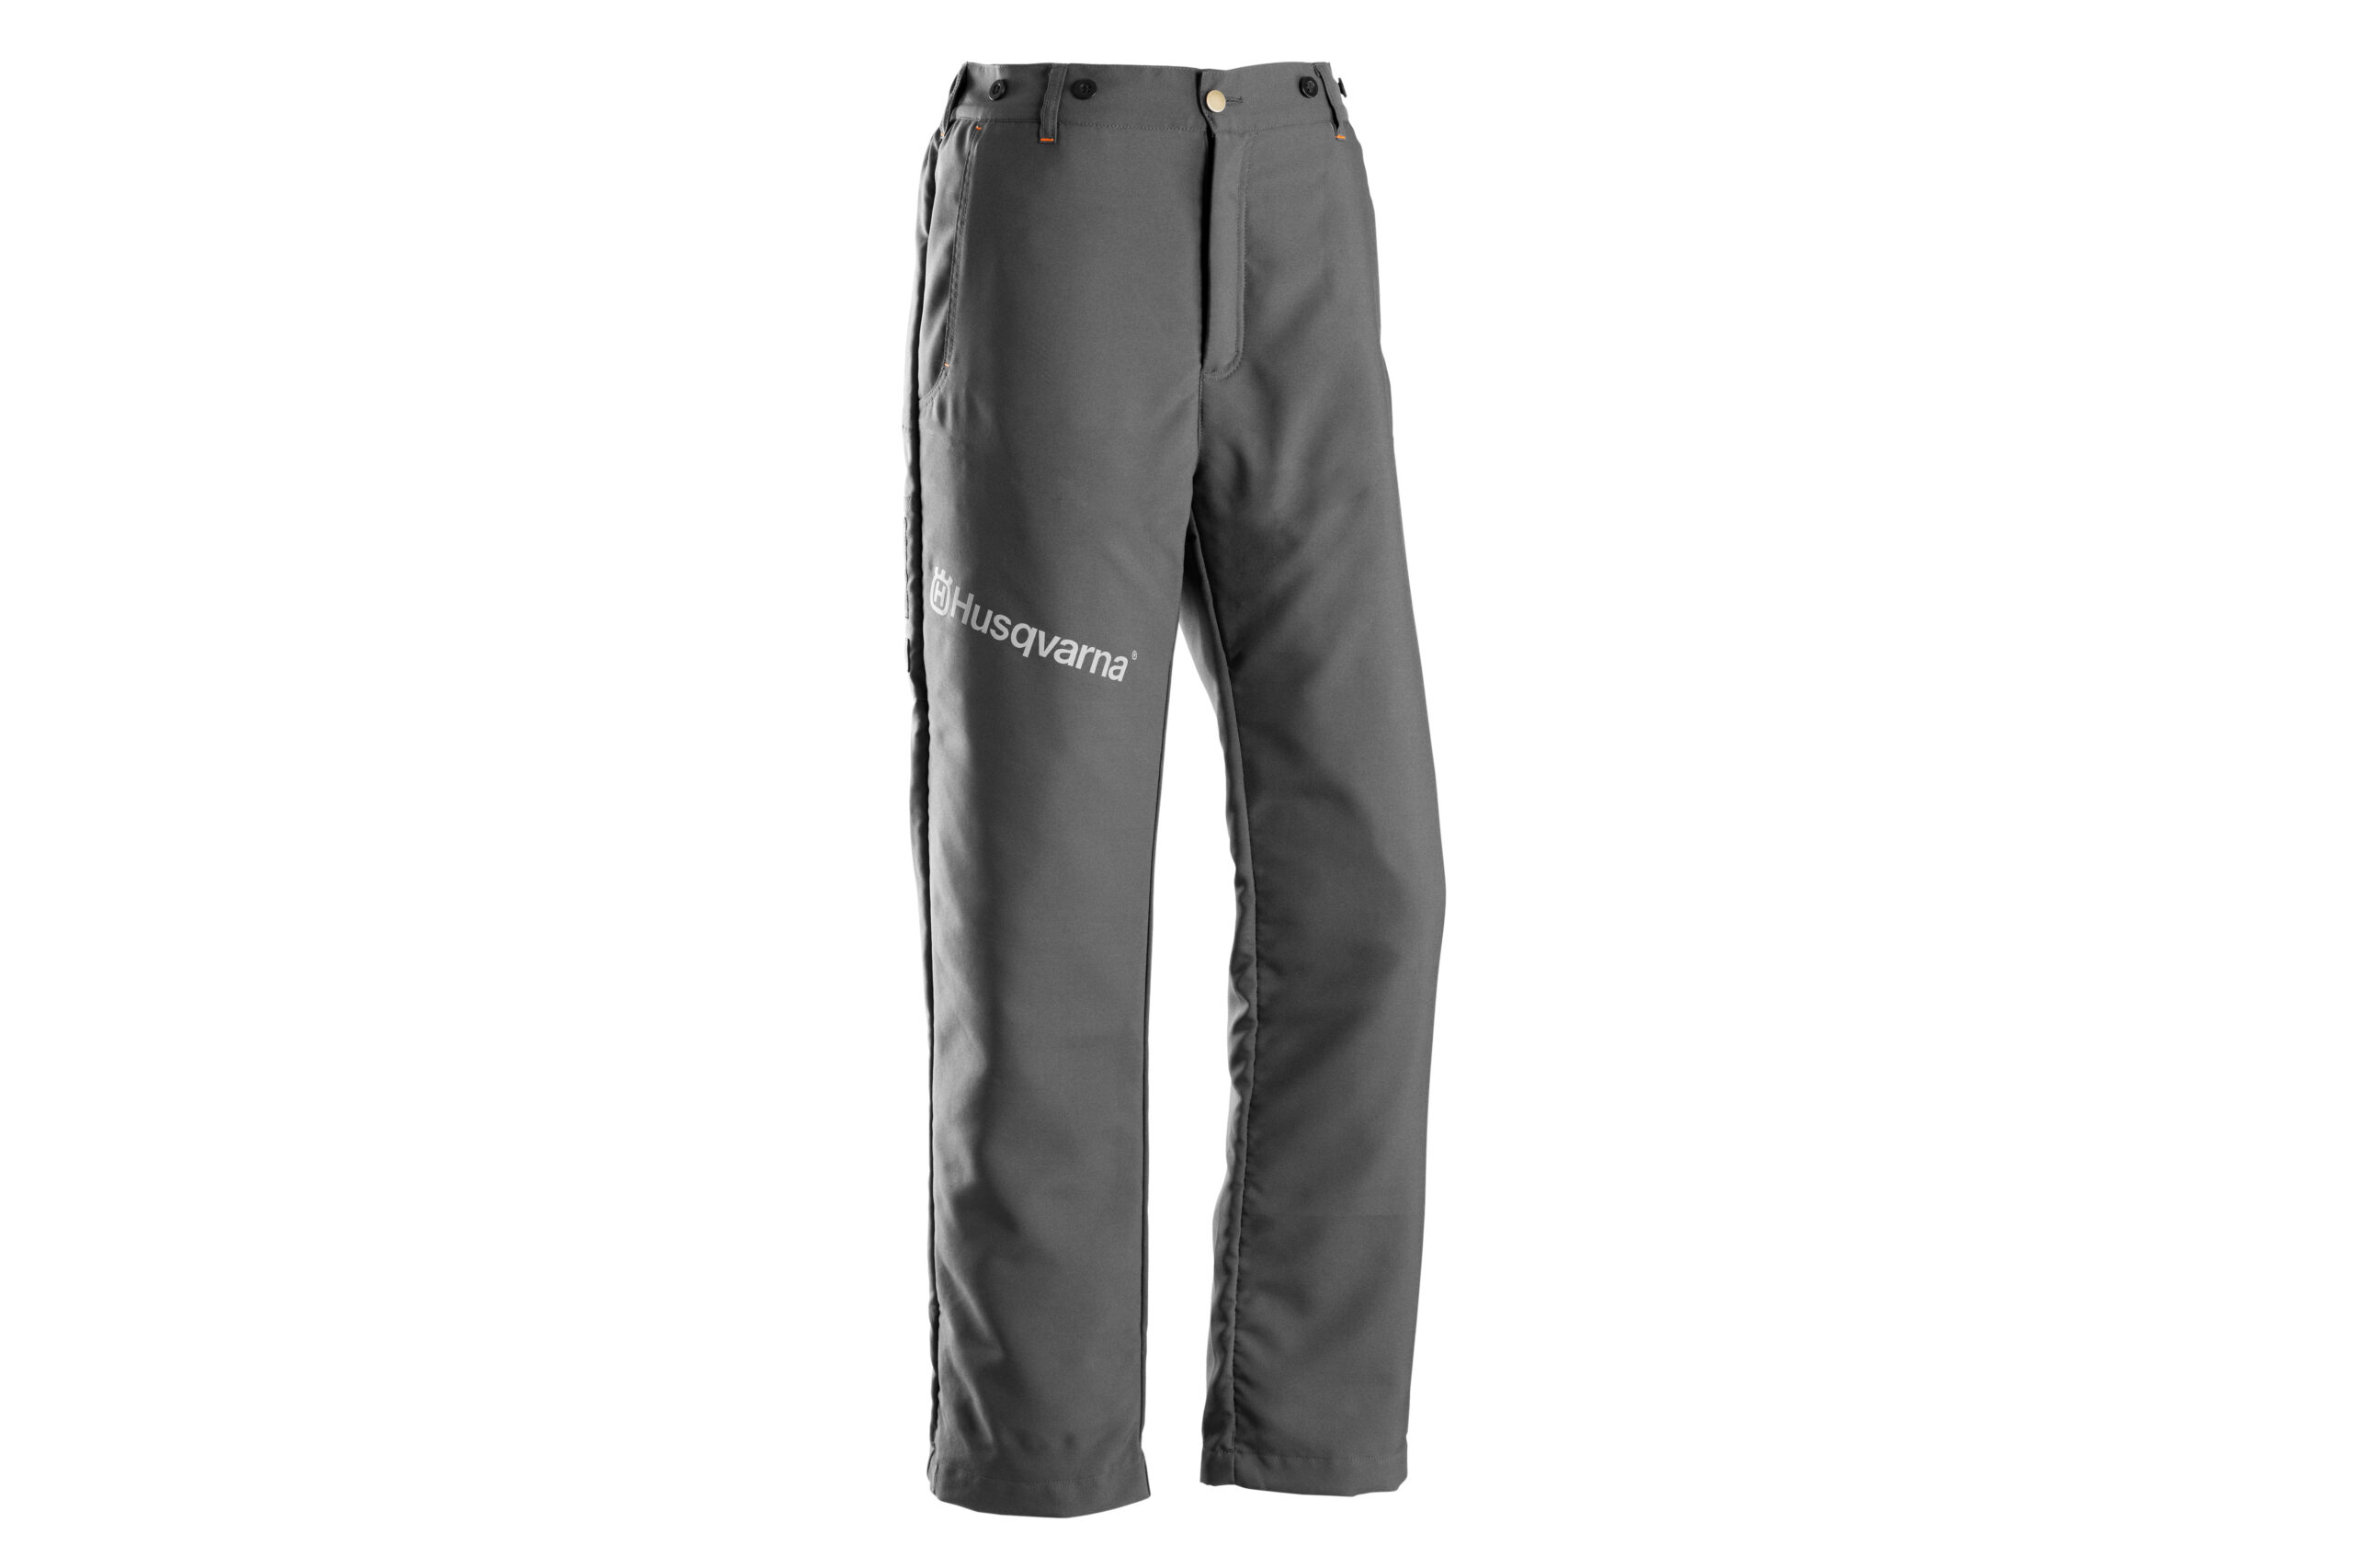 Clogger Zero Gen2 Light and Cool Women's Chainsaw Trousers – Grey/Green -  Edwards Mower Repairs